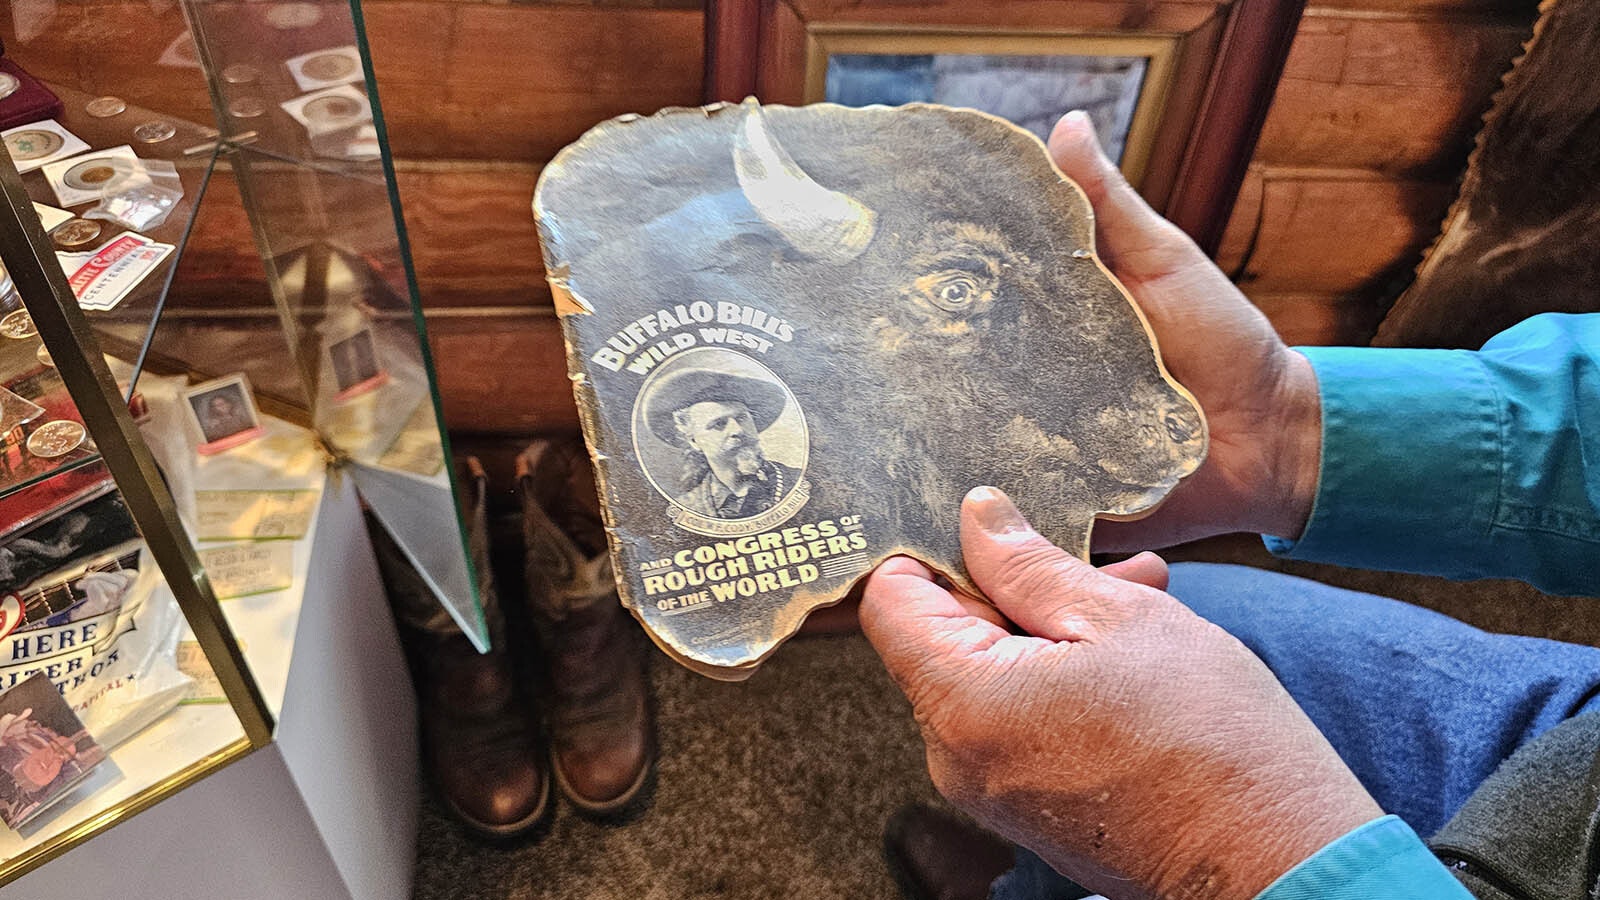 This 1898 Buffalo Bill Cody Wild West Show program is among historical artifacts Dave Stephens has found and collected over the years.